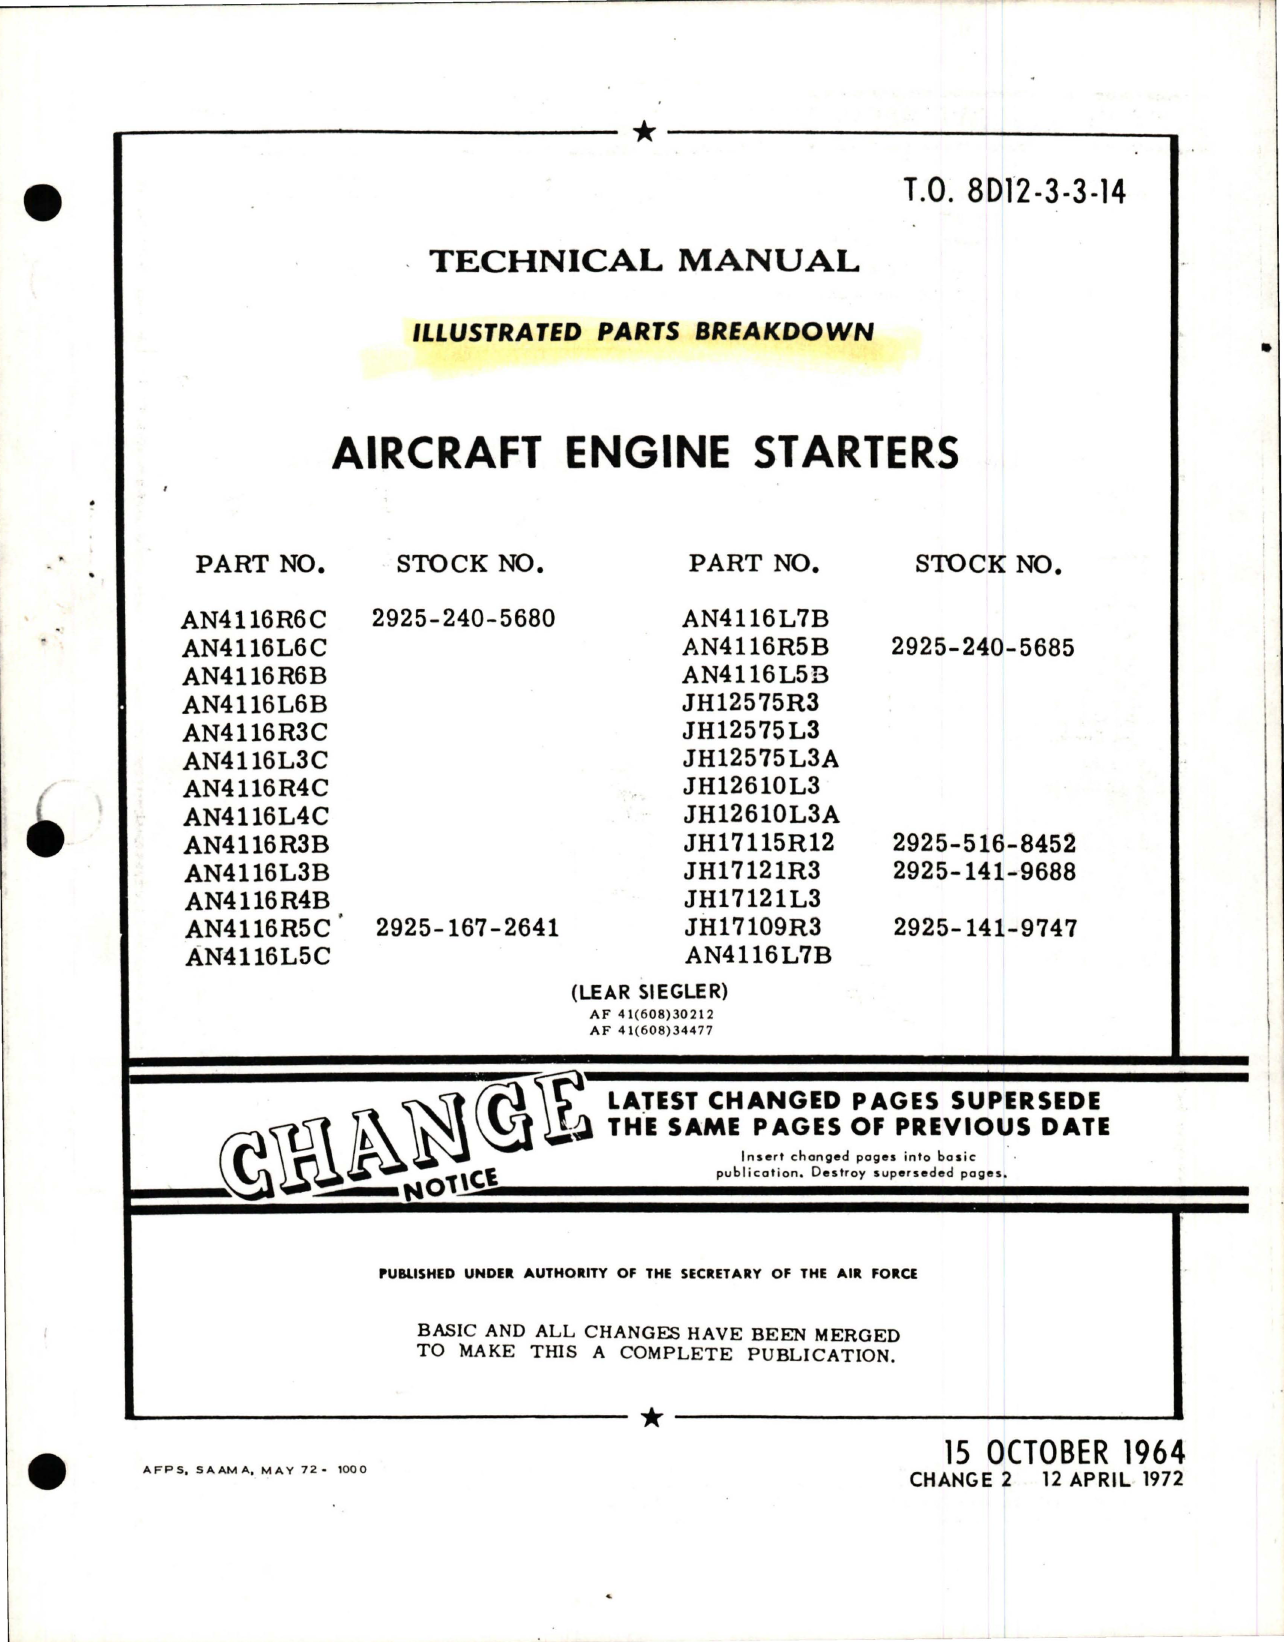 Sample page 1 from AirCorps Library document: Illustrated Parts Breakdown for Aircraft Engine Starters